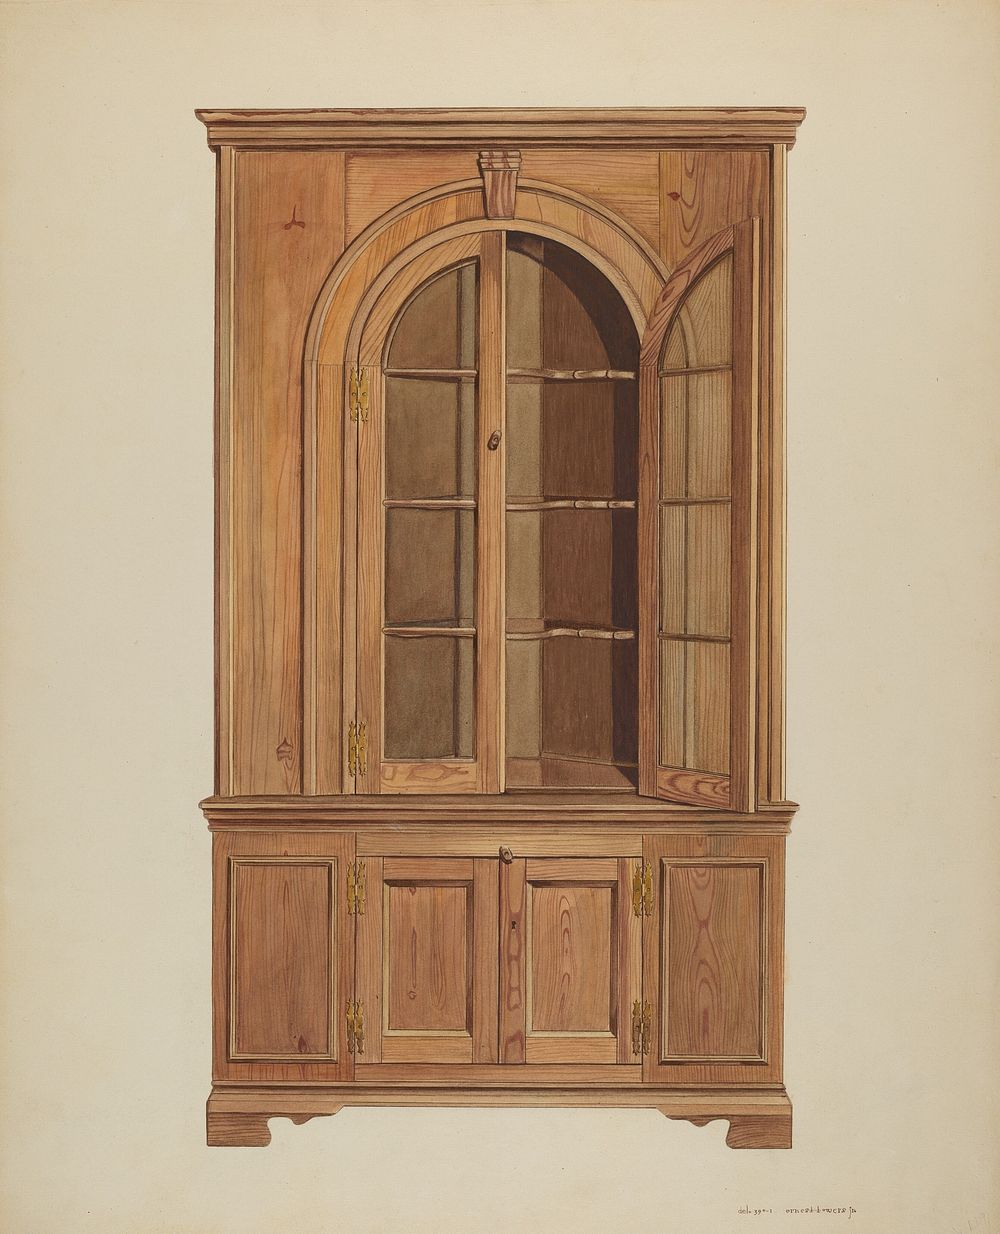 Corner Cupboard (c. 1939) by Ernest A. Towers, Jr.